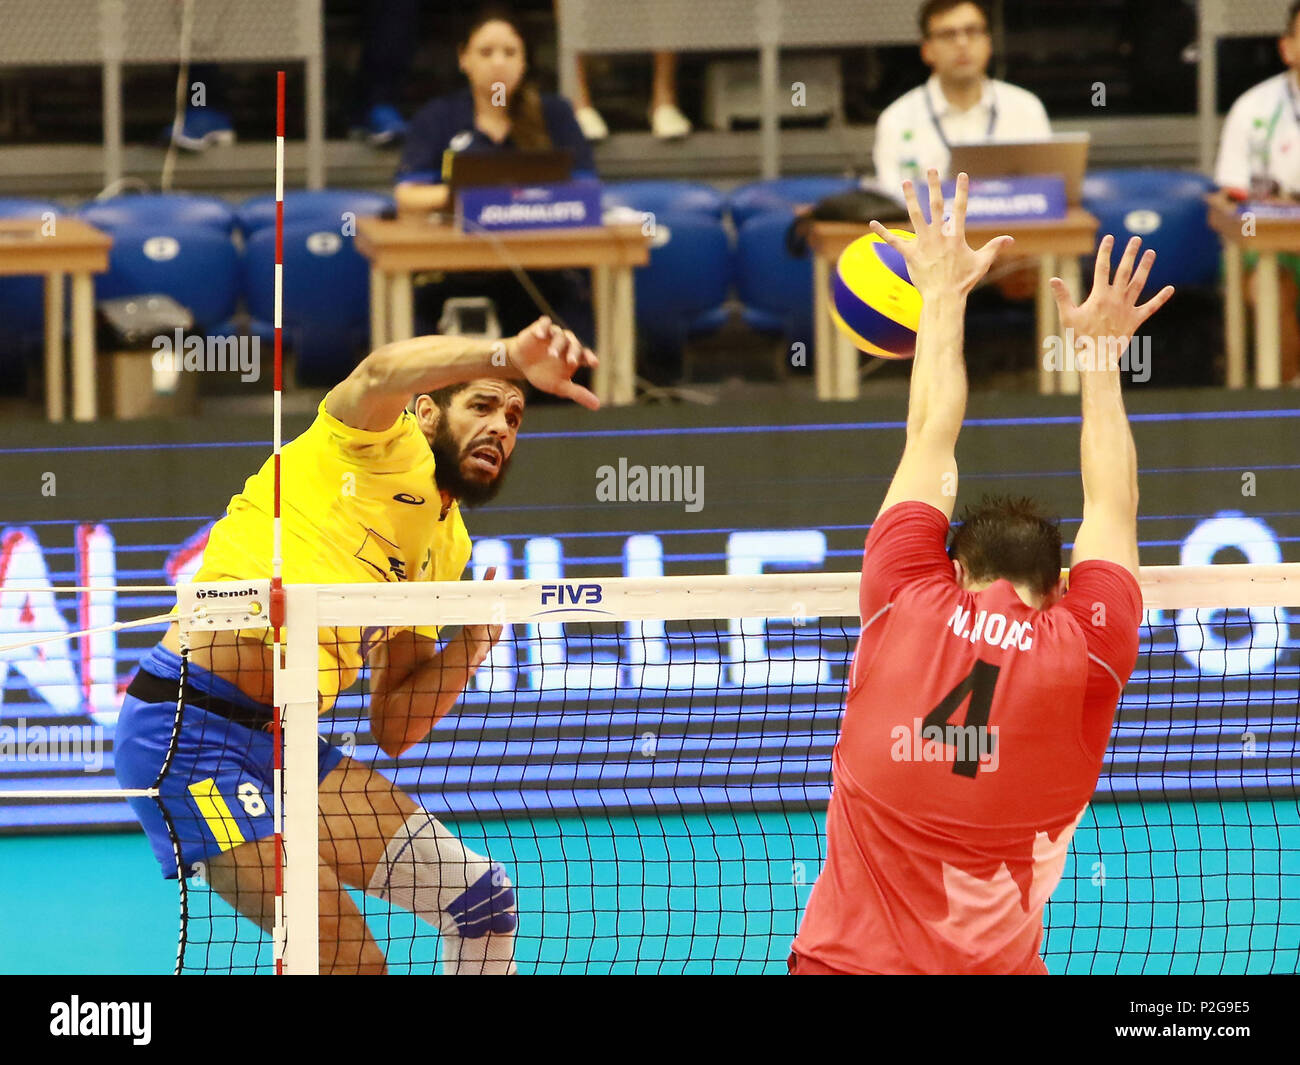 Varna, Bulgaria. 15th June, 2018. WALLACE DE SOUZA (Brazil) hits against NICHOLAS HOAG (Canada, red), during mens Volleyball Nations League, week 4, Canada vs Brazil at Palace of culture and sport. Credit: Wolfgang Fehrmann/ZUMA Wire/Alamy Live News Stock Photo